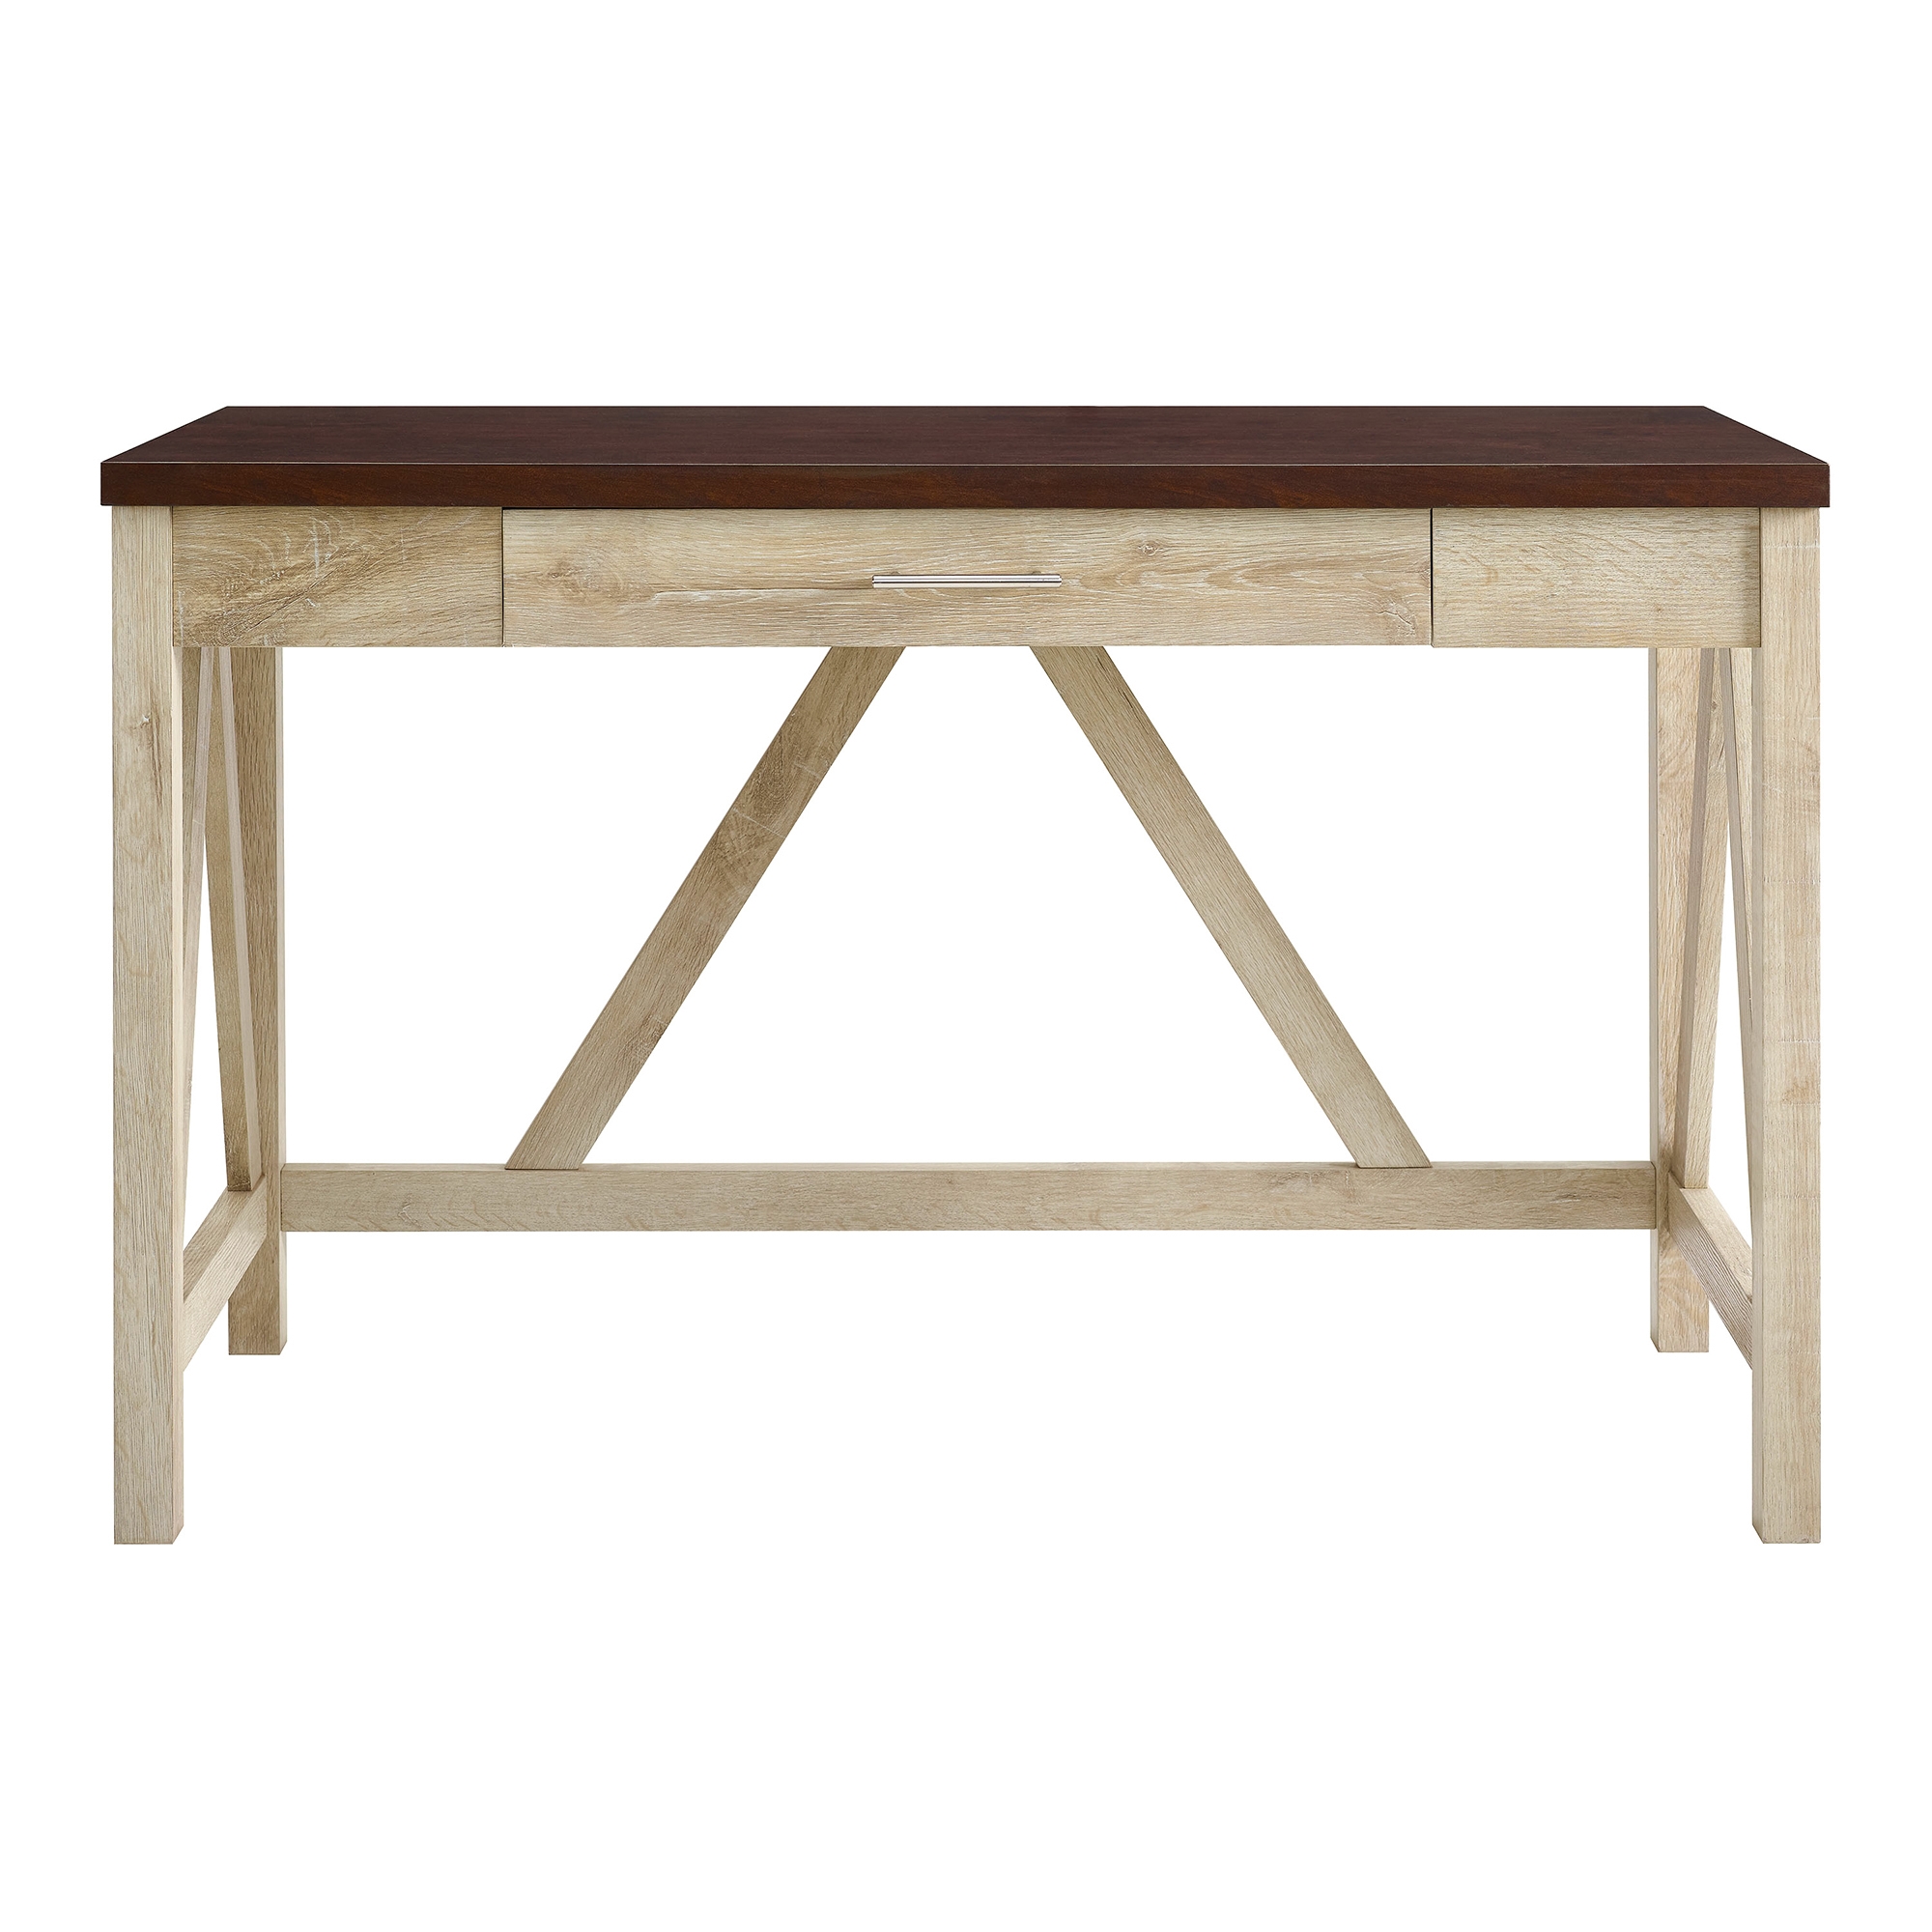 46" A Frame Modern Farmhouse Wood Computer Desk with Drawer - White Oak/Traditional Brown - Image 1